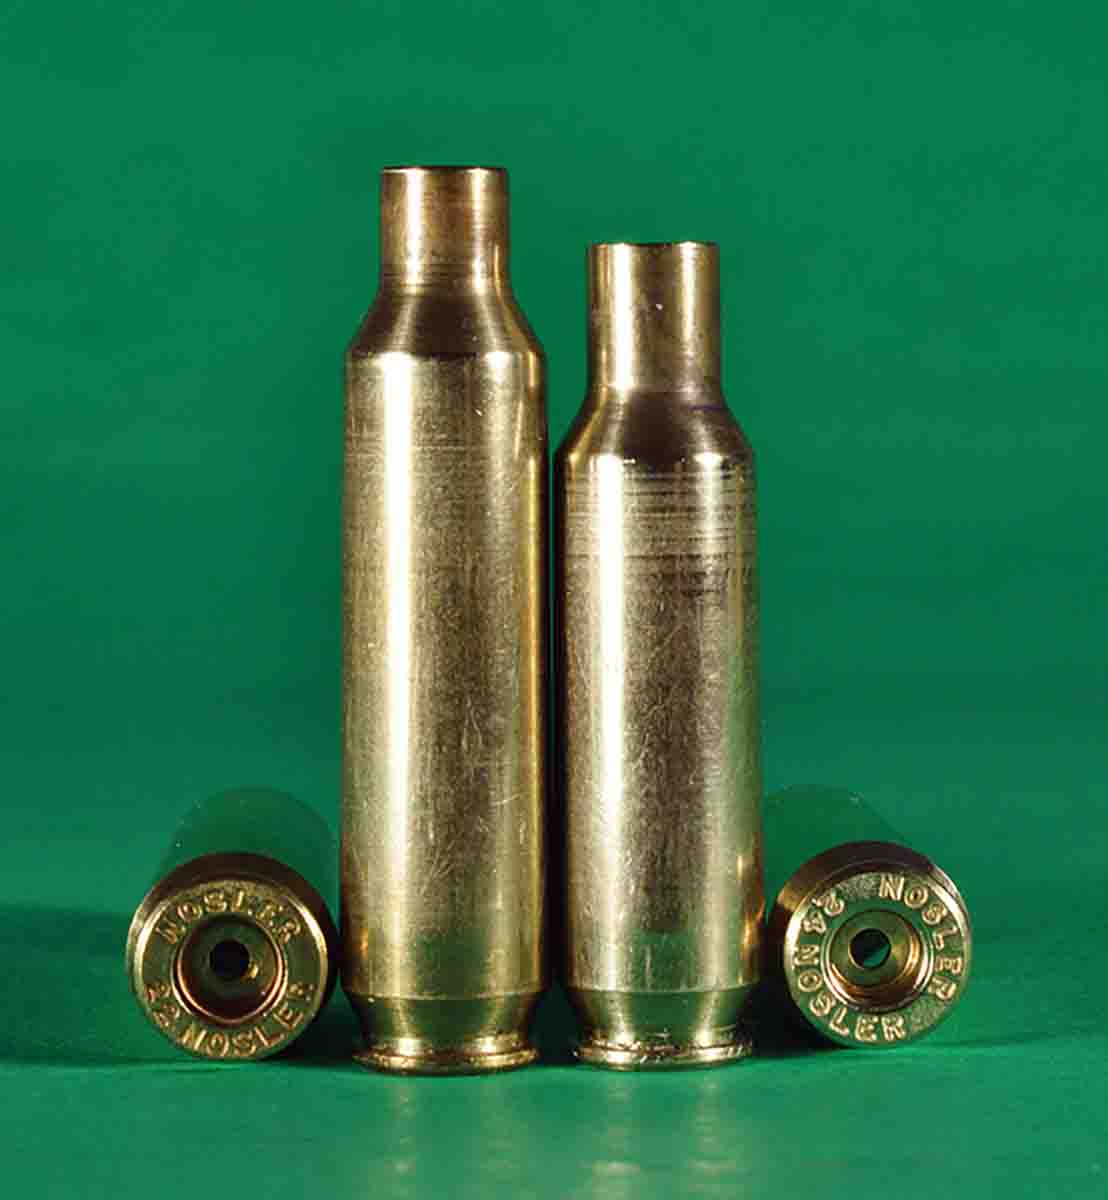 The .24 Nosler (right) was derived from the .22 Nosler.